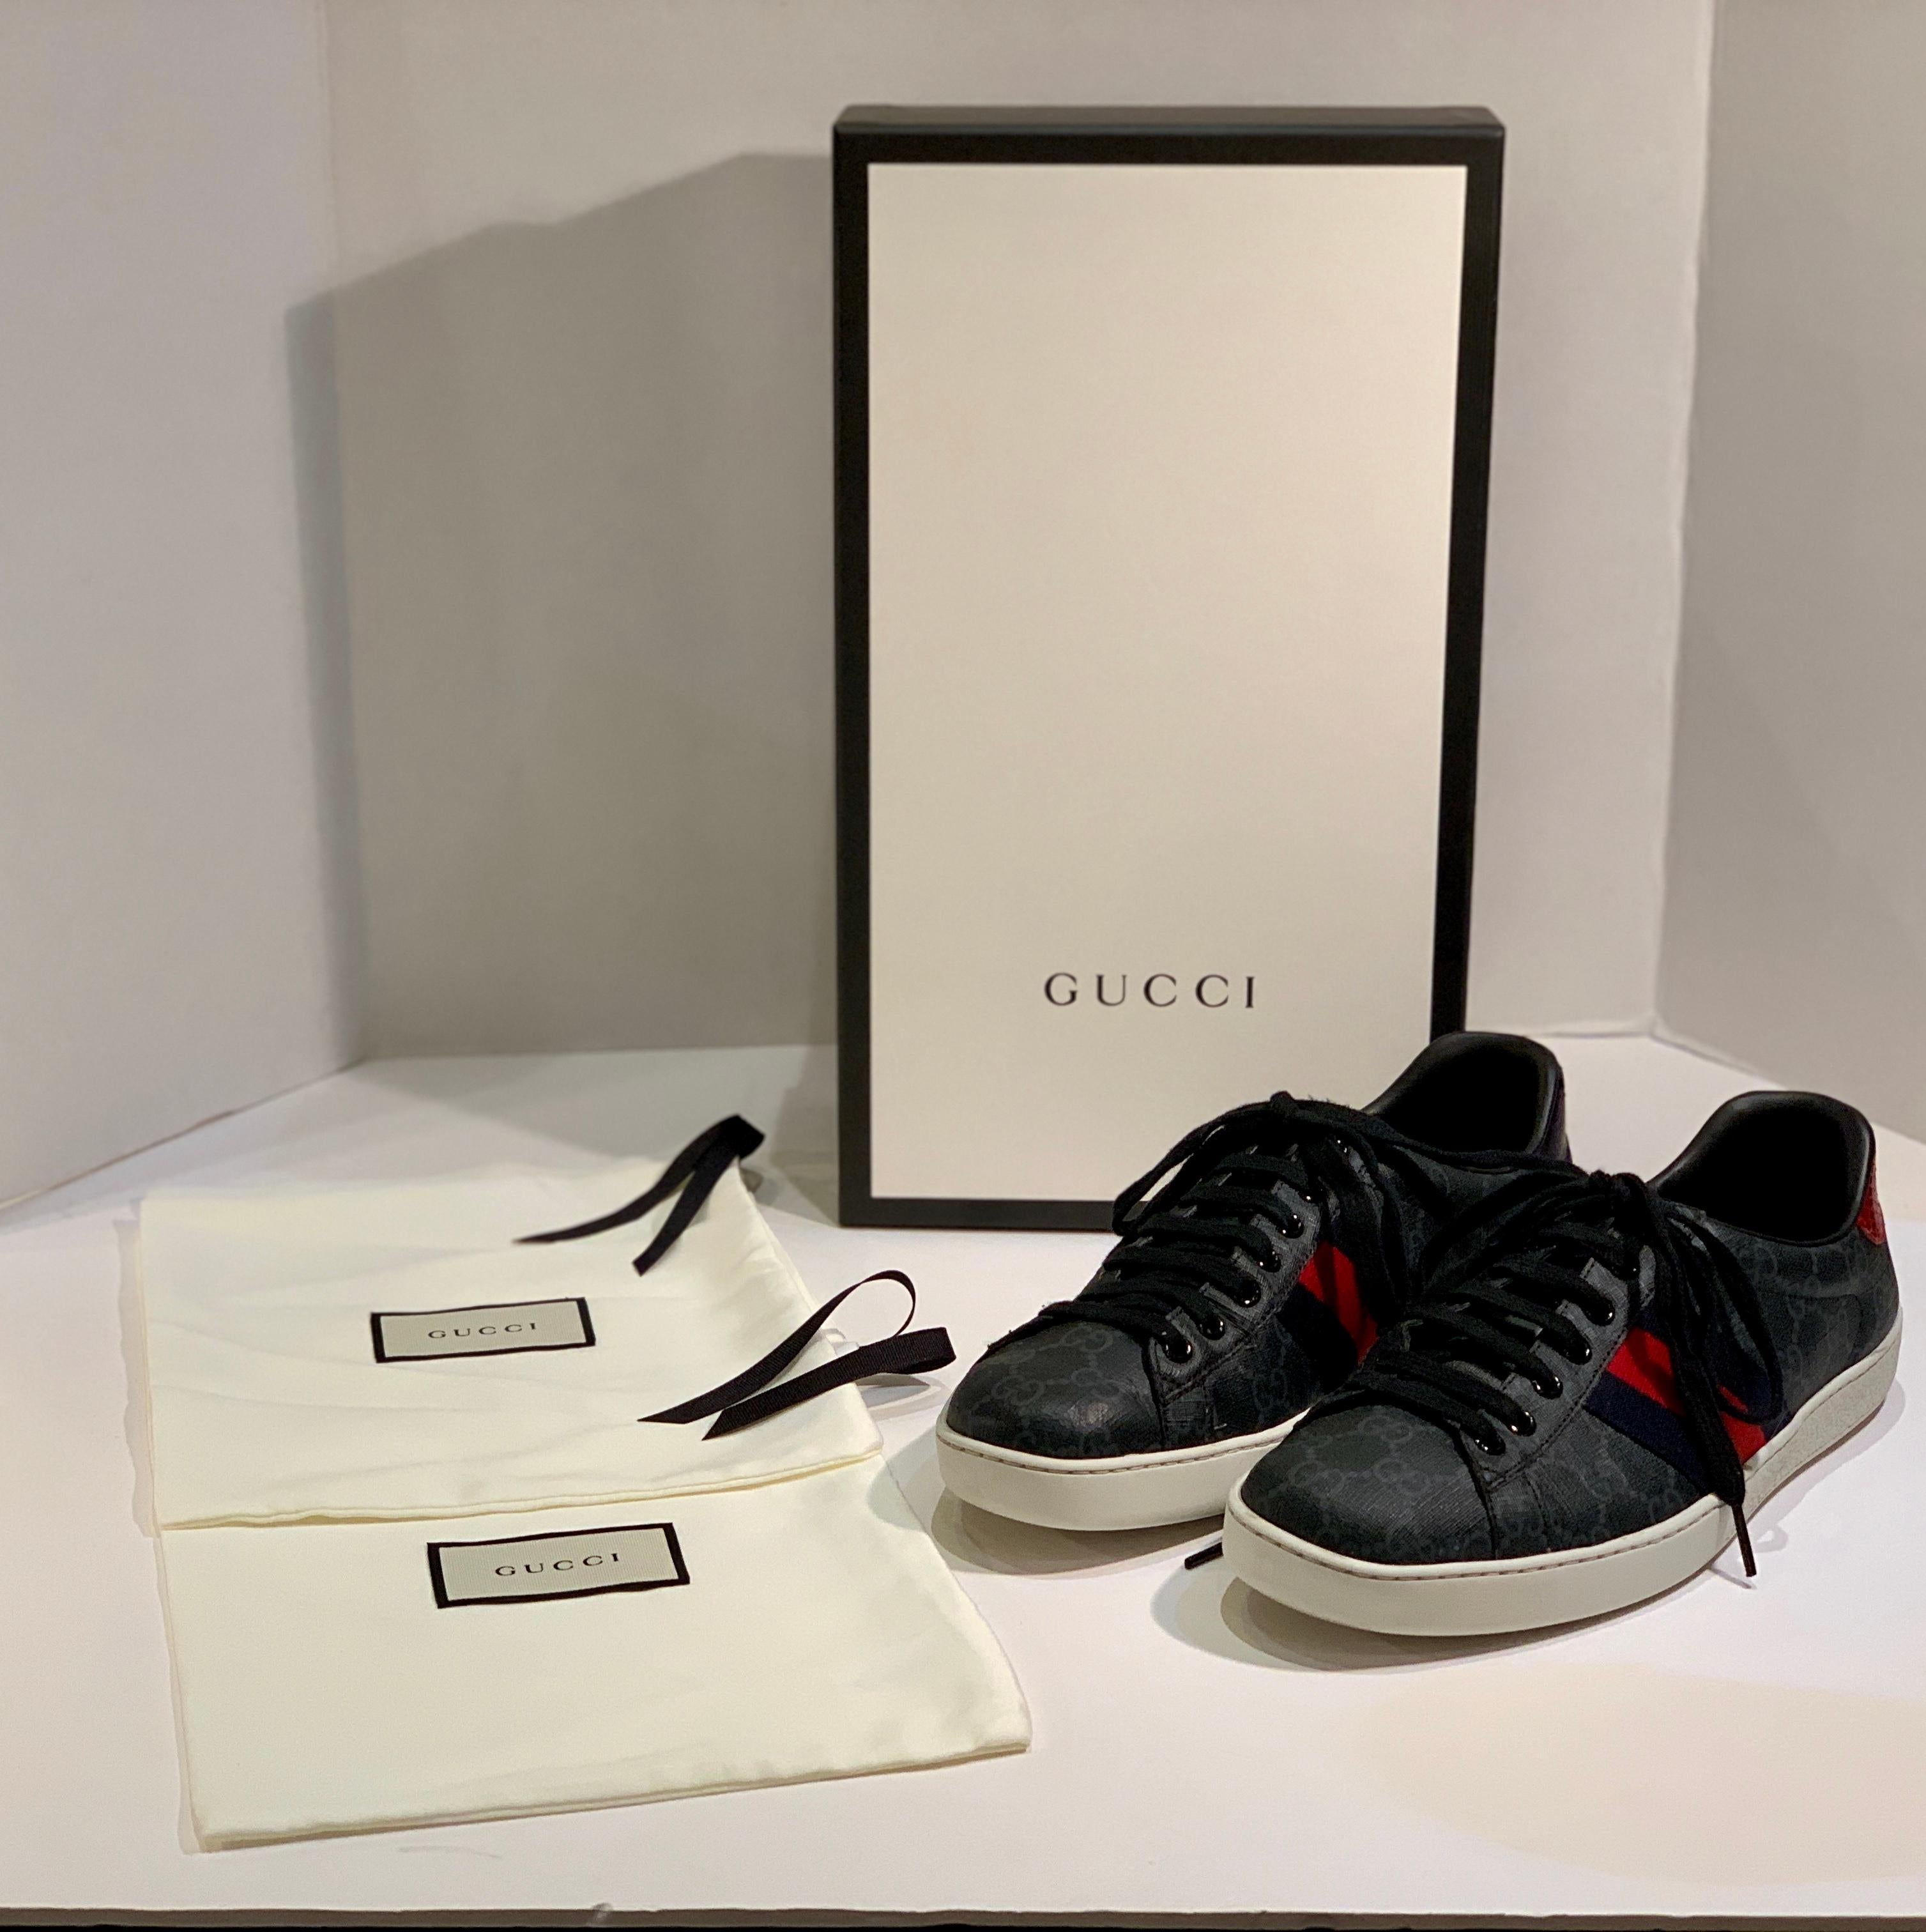 Stylish Retro GUCCI Ace GG Supreme Unisex Sneakers Size 7 Mens or Size 9 Womens 4